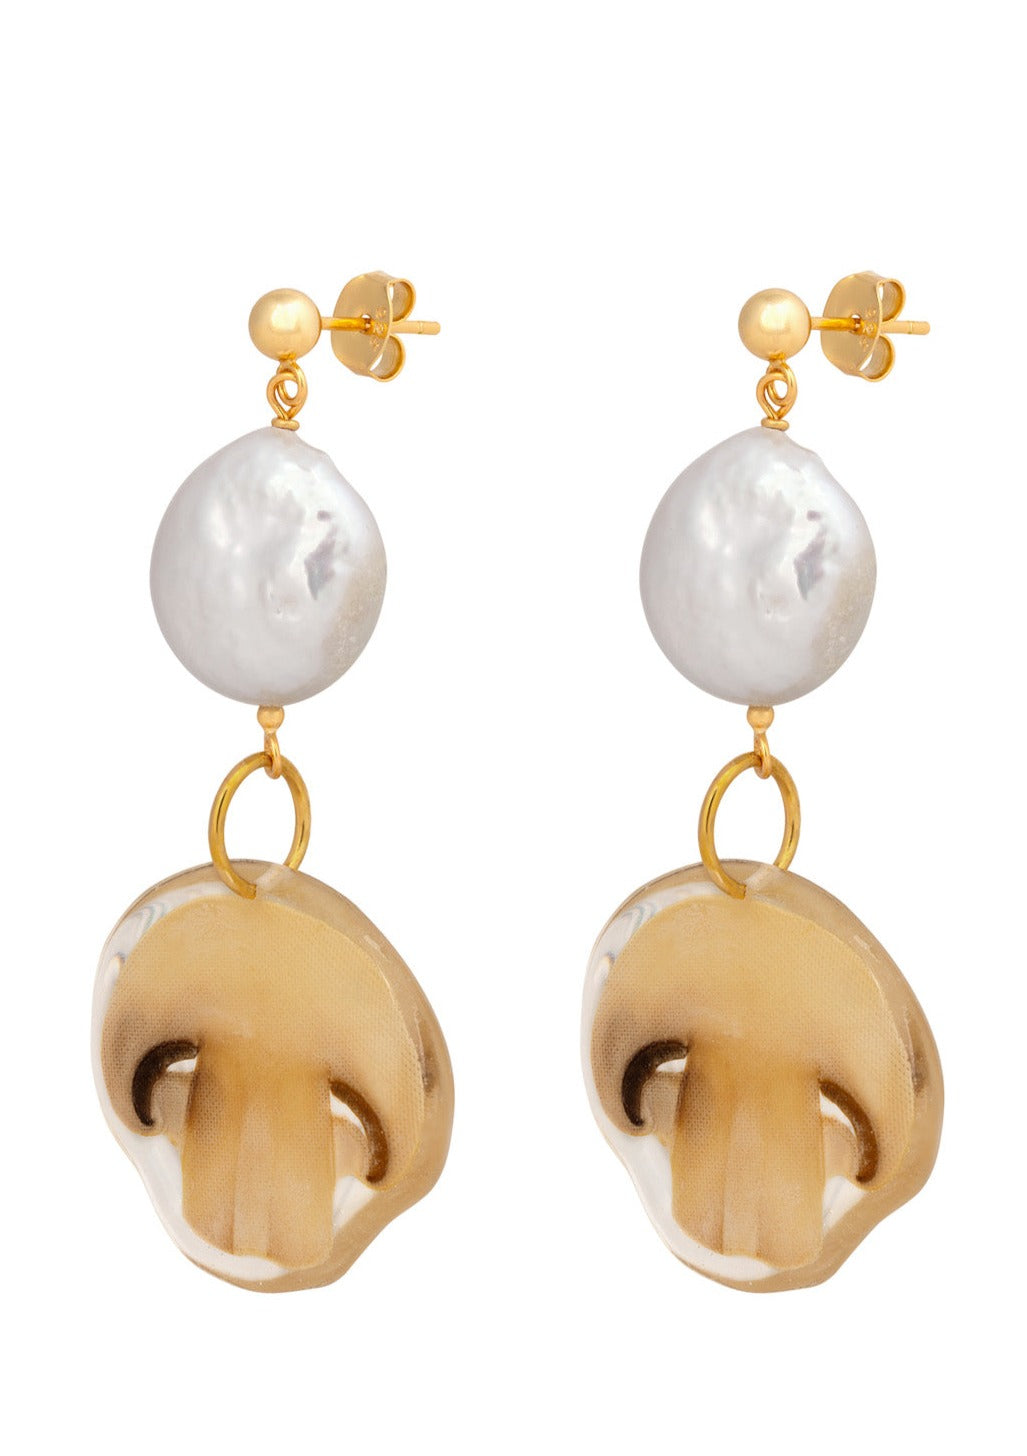 Resin Coated Mushroom slices with a Freshwater Pearl on Stud Earrings